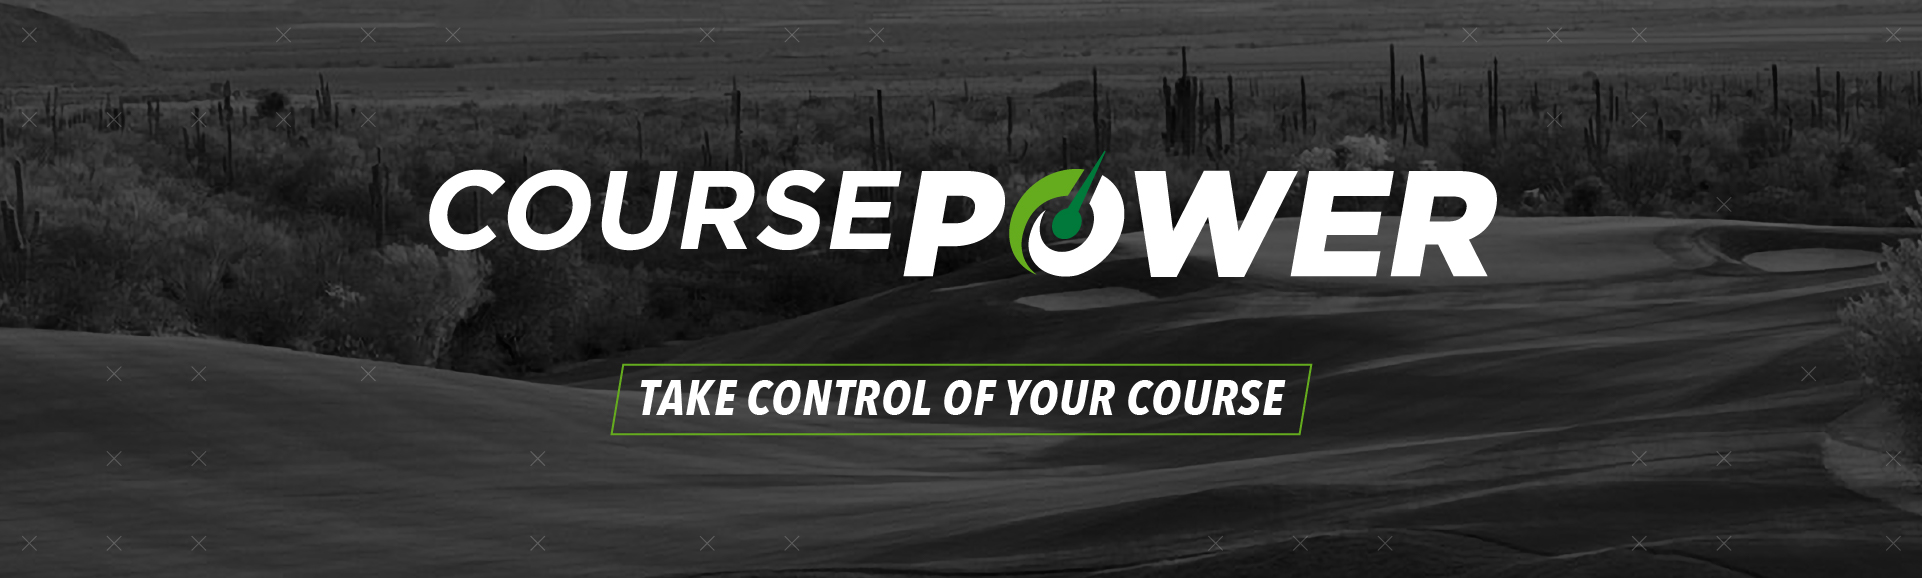 Course Power take control of your course